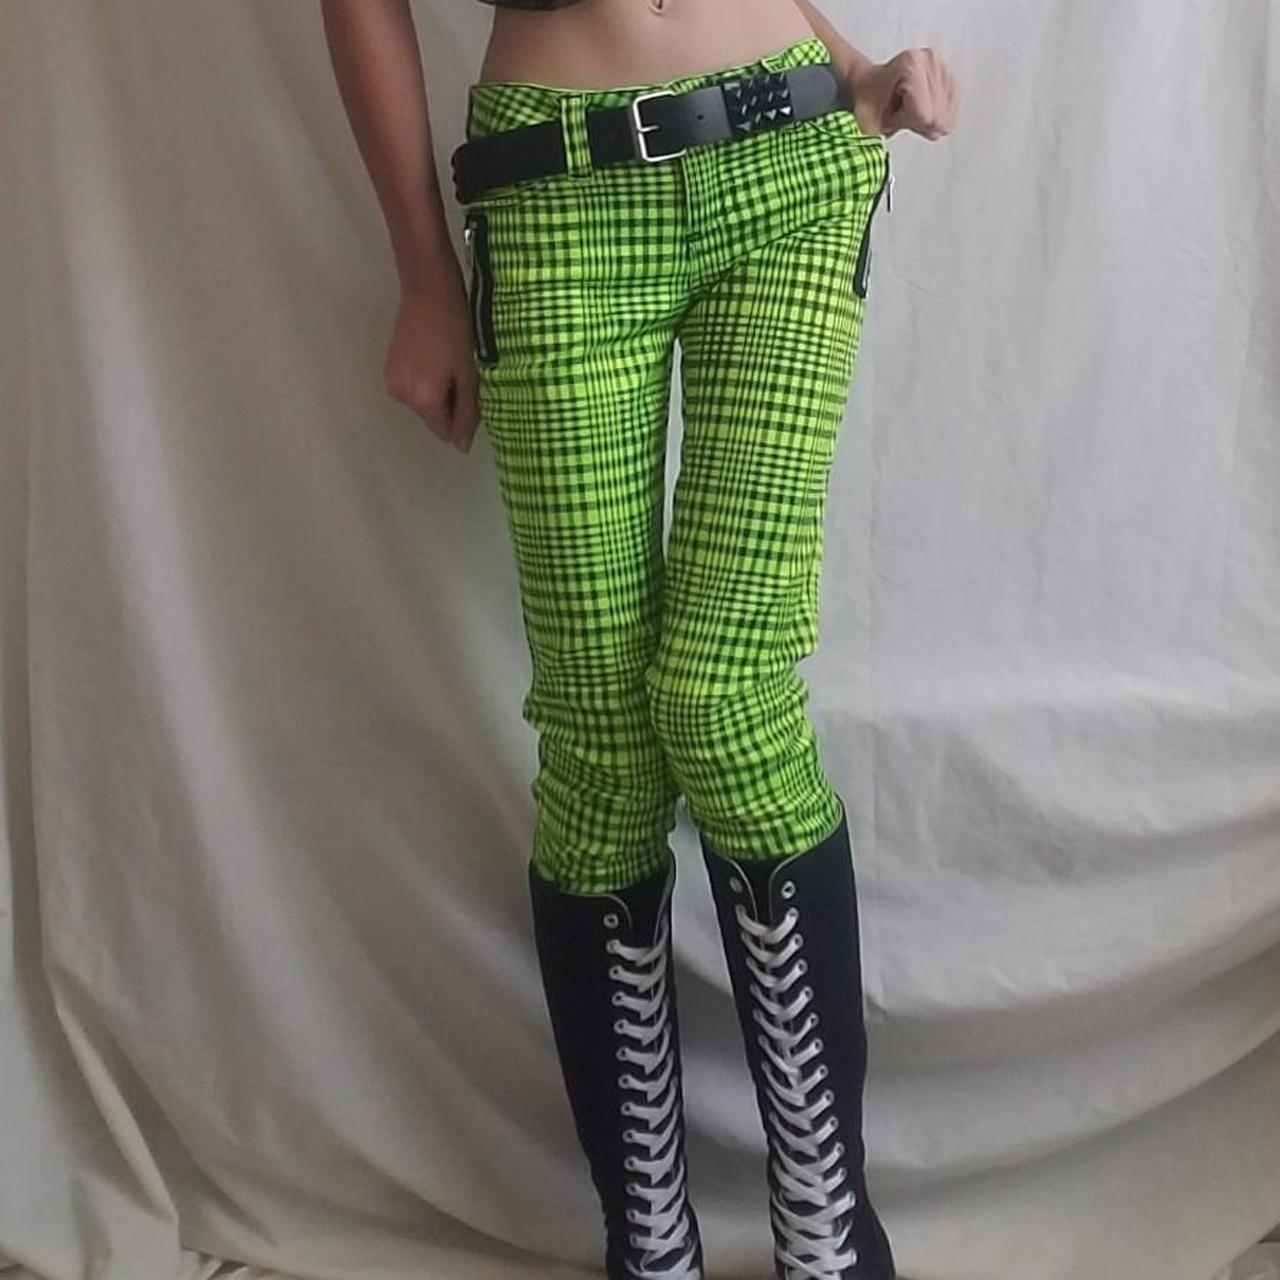 Toxic Neon Green Tripp pants🖤💚 These pants are so - Depop